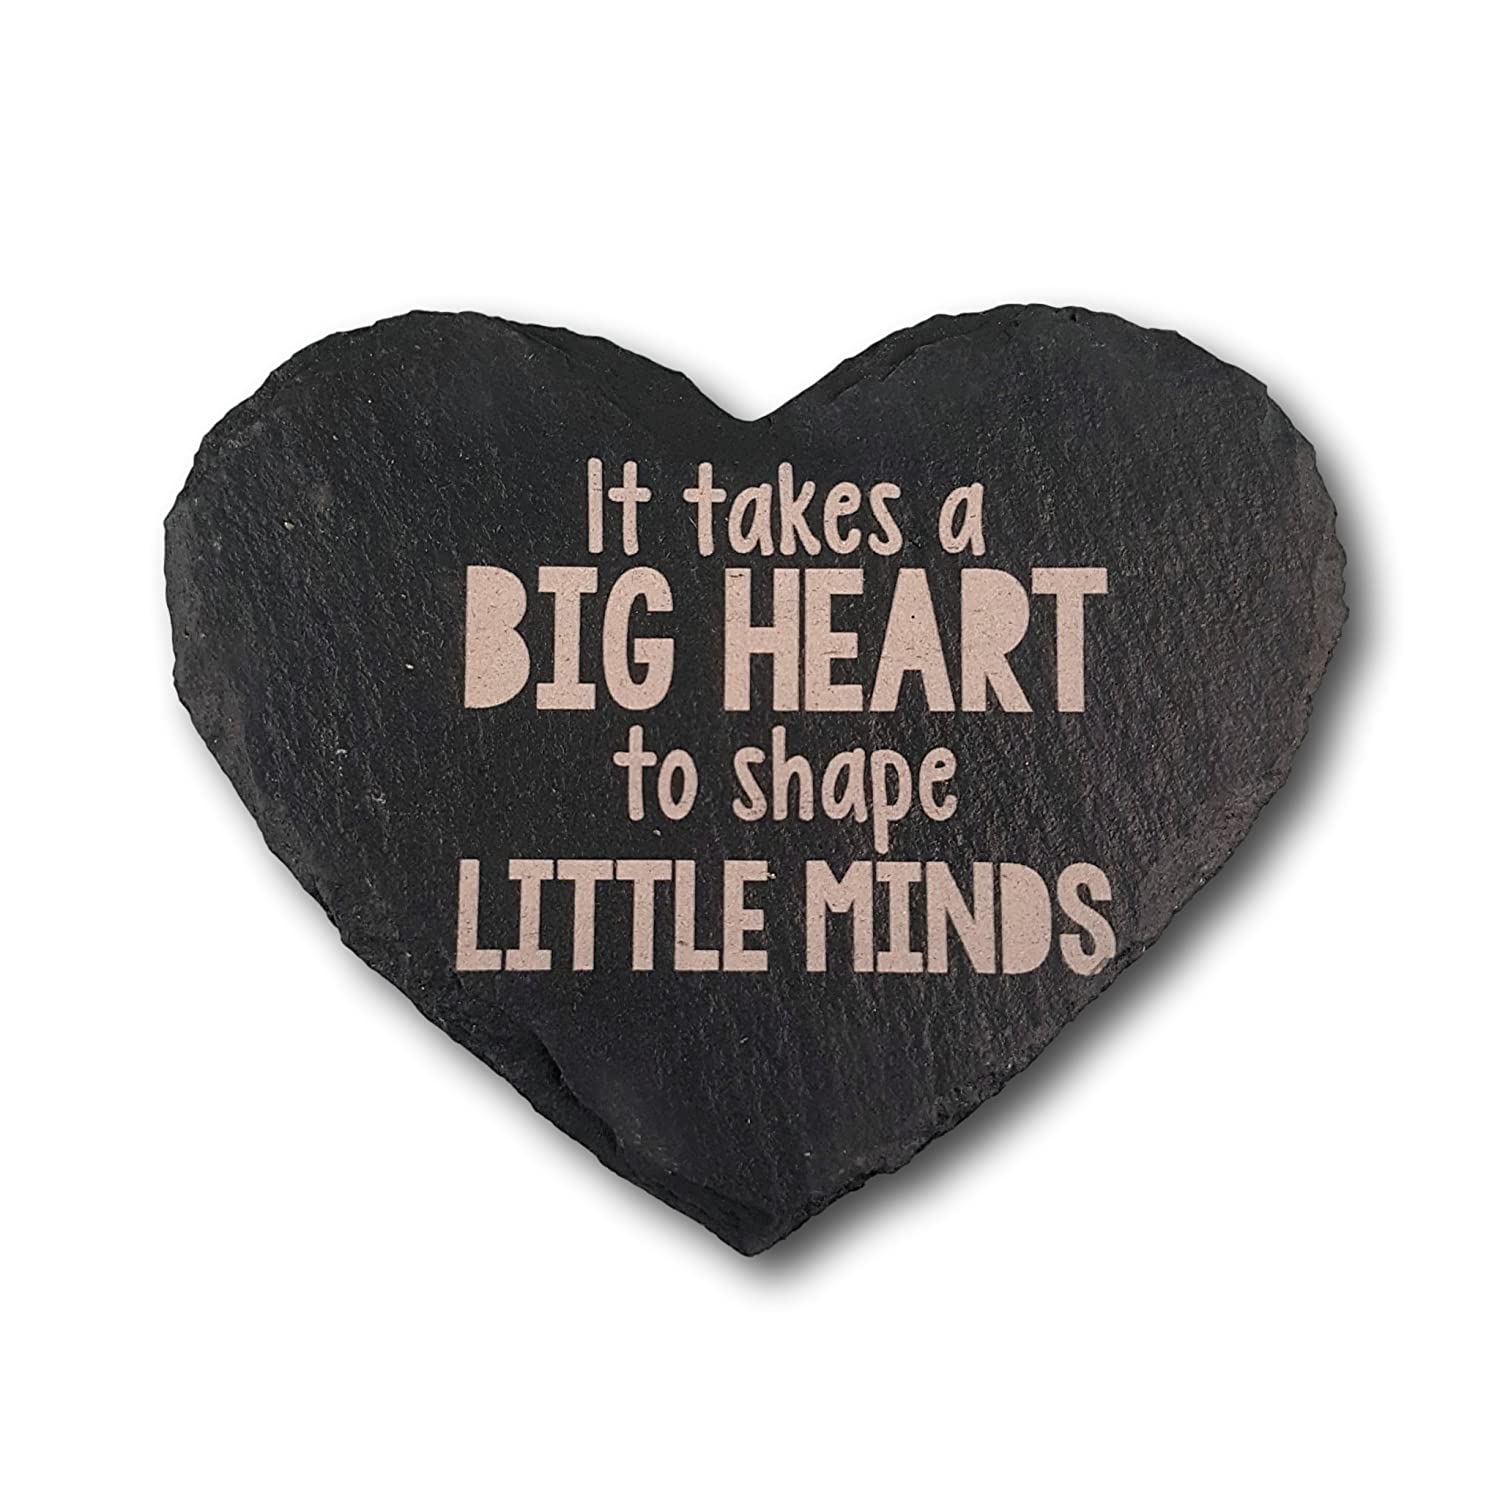 Yes you have the biggest heart!